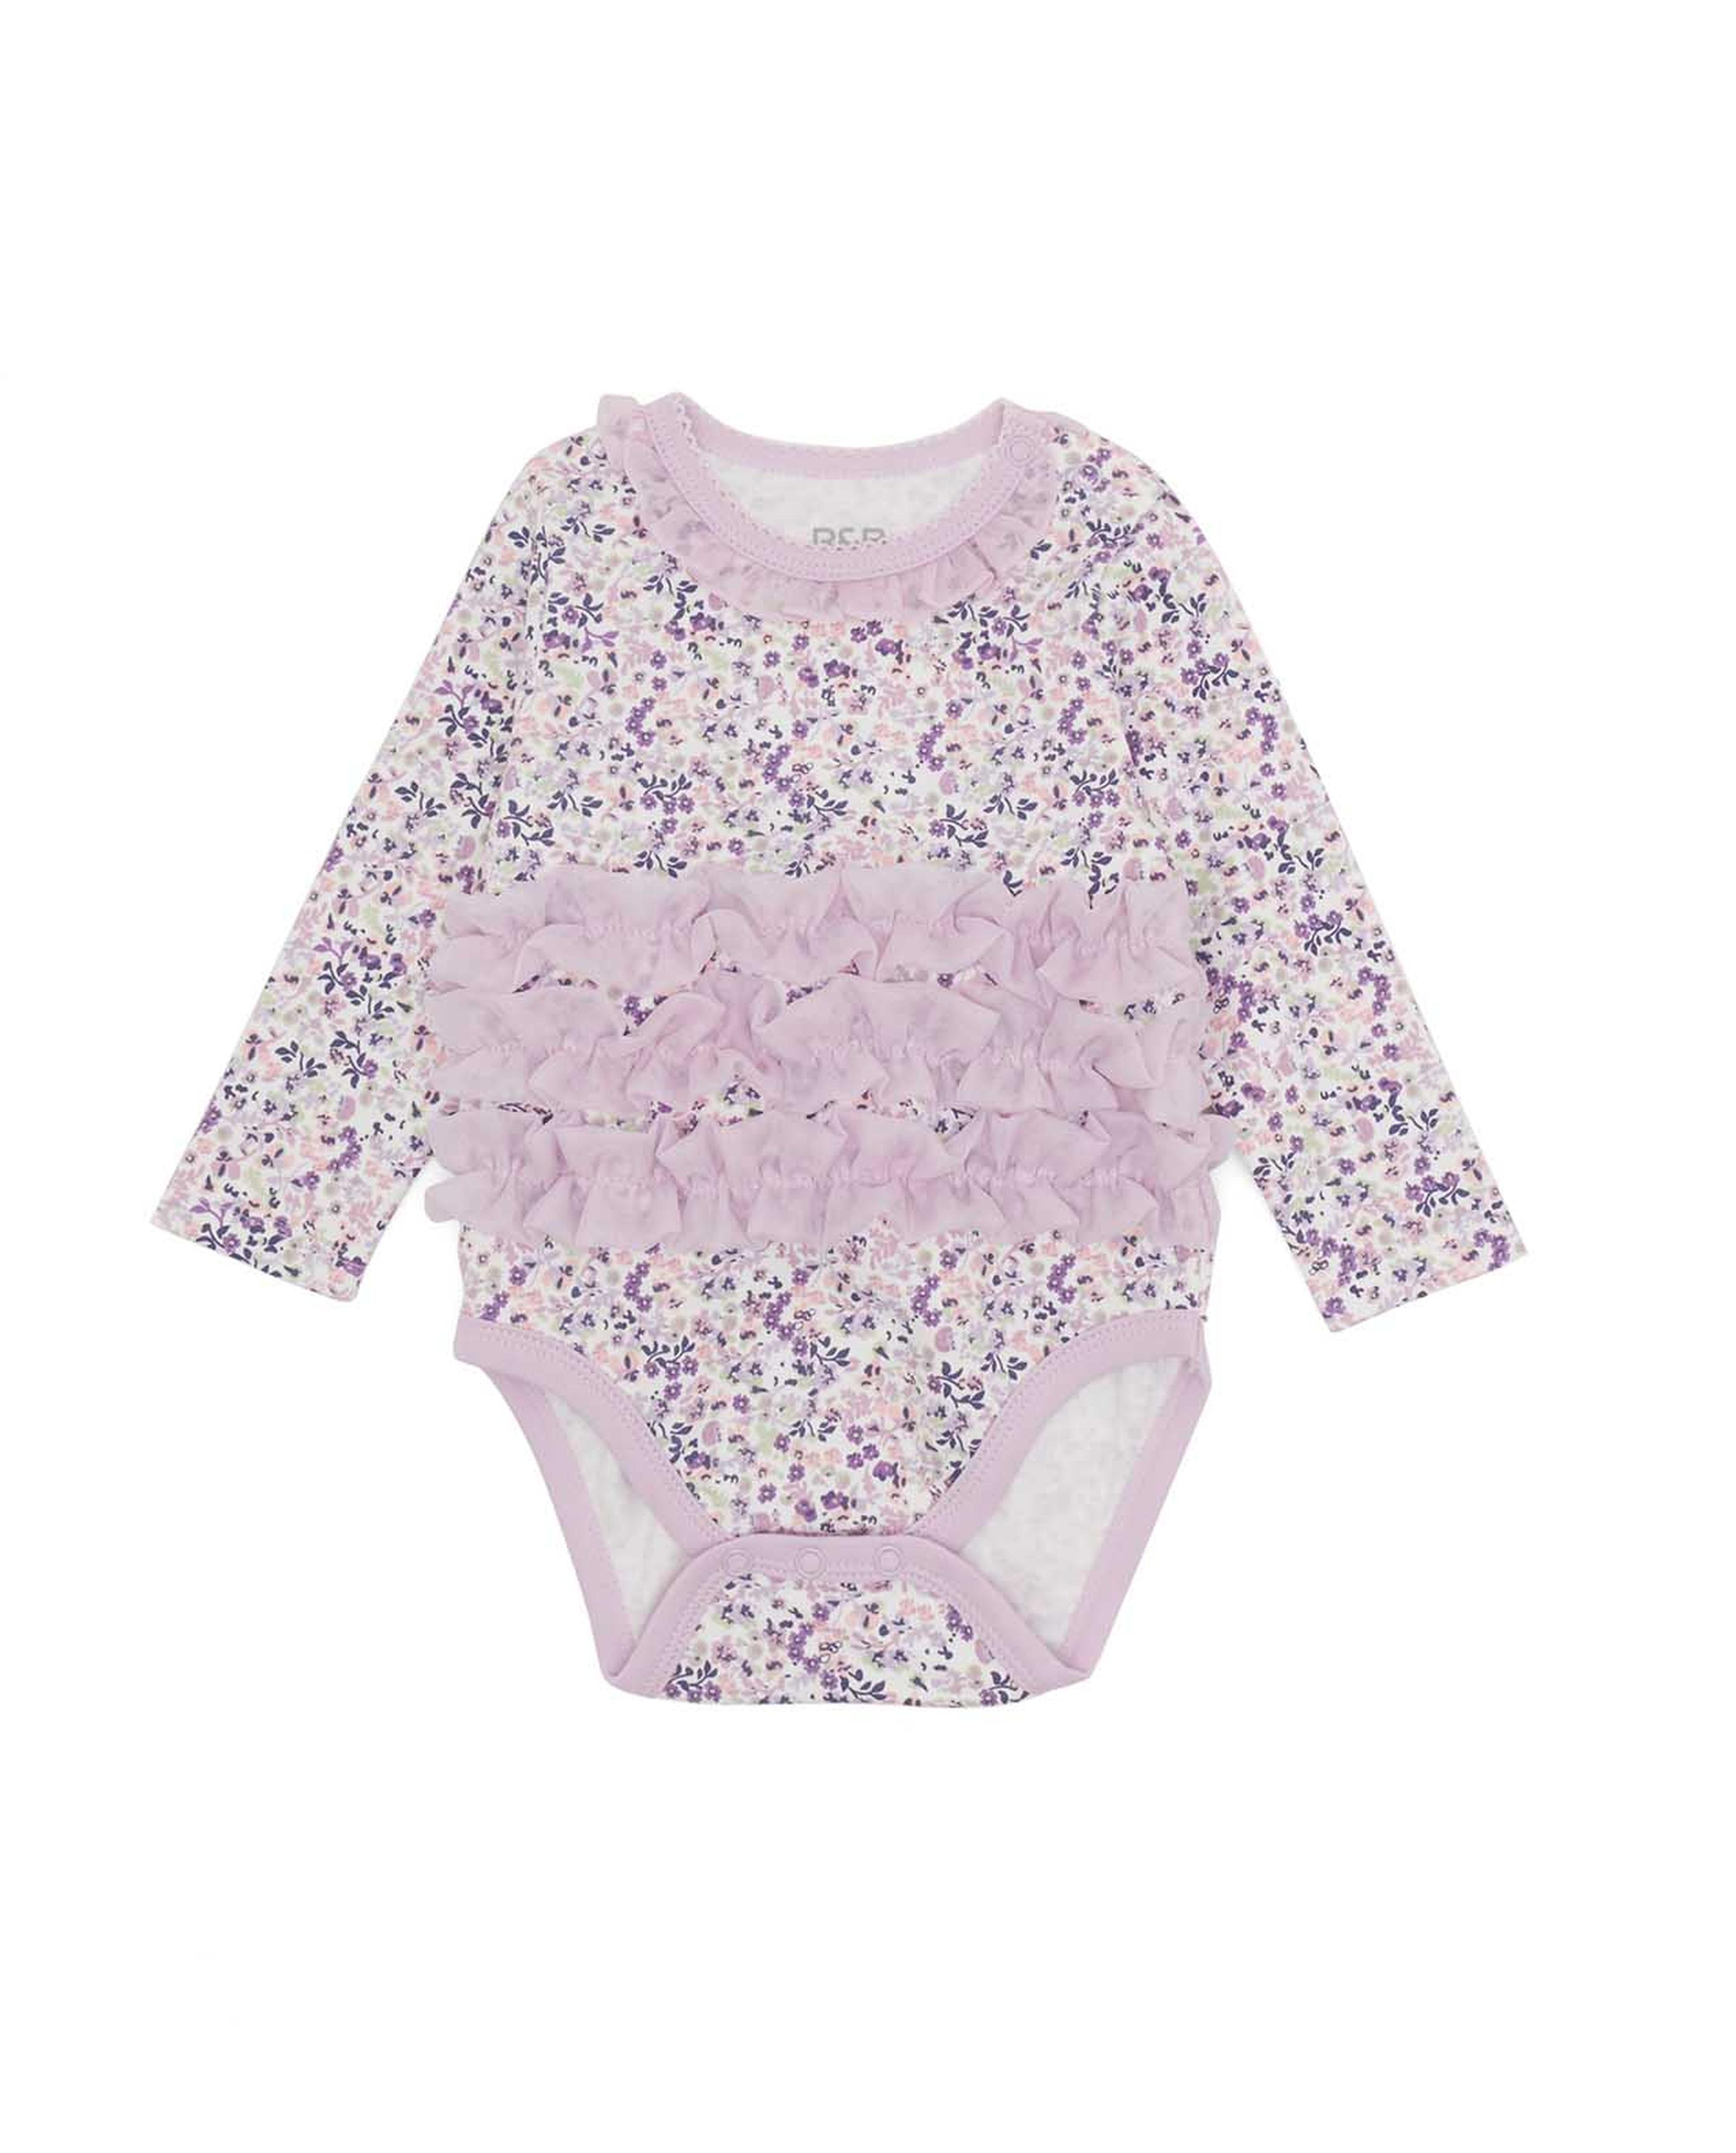 Floral Print Bodysuit with Long Sleeves